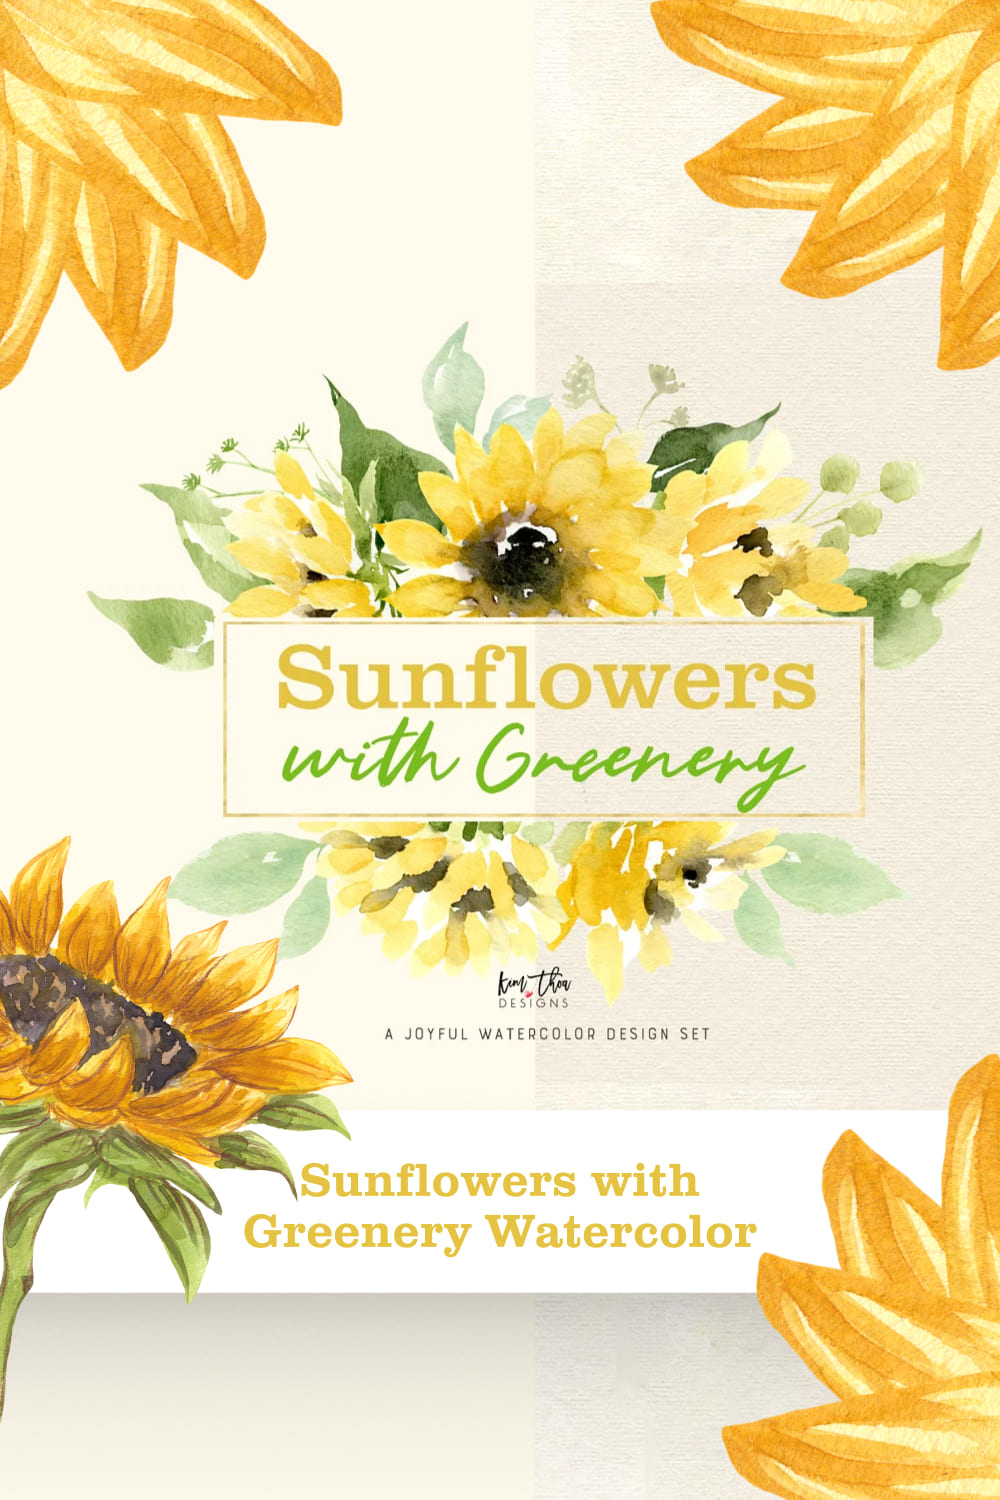 Sunflowers with Greenery Watercolor.